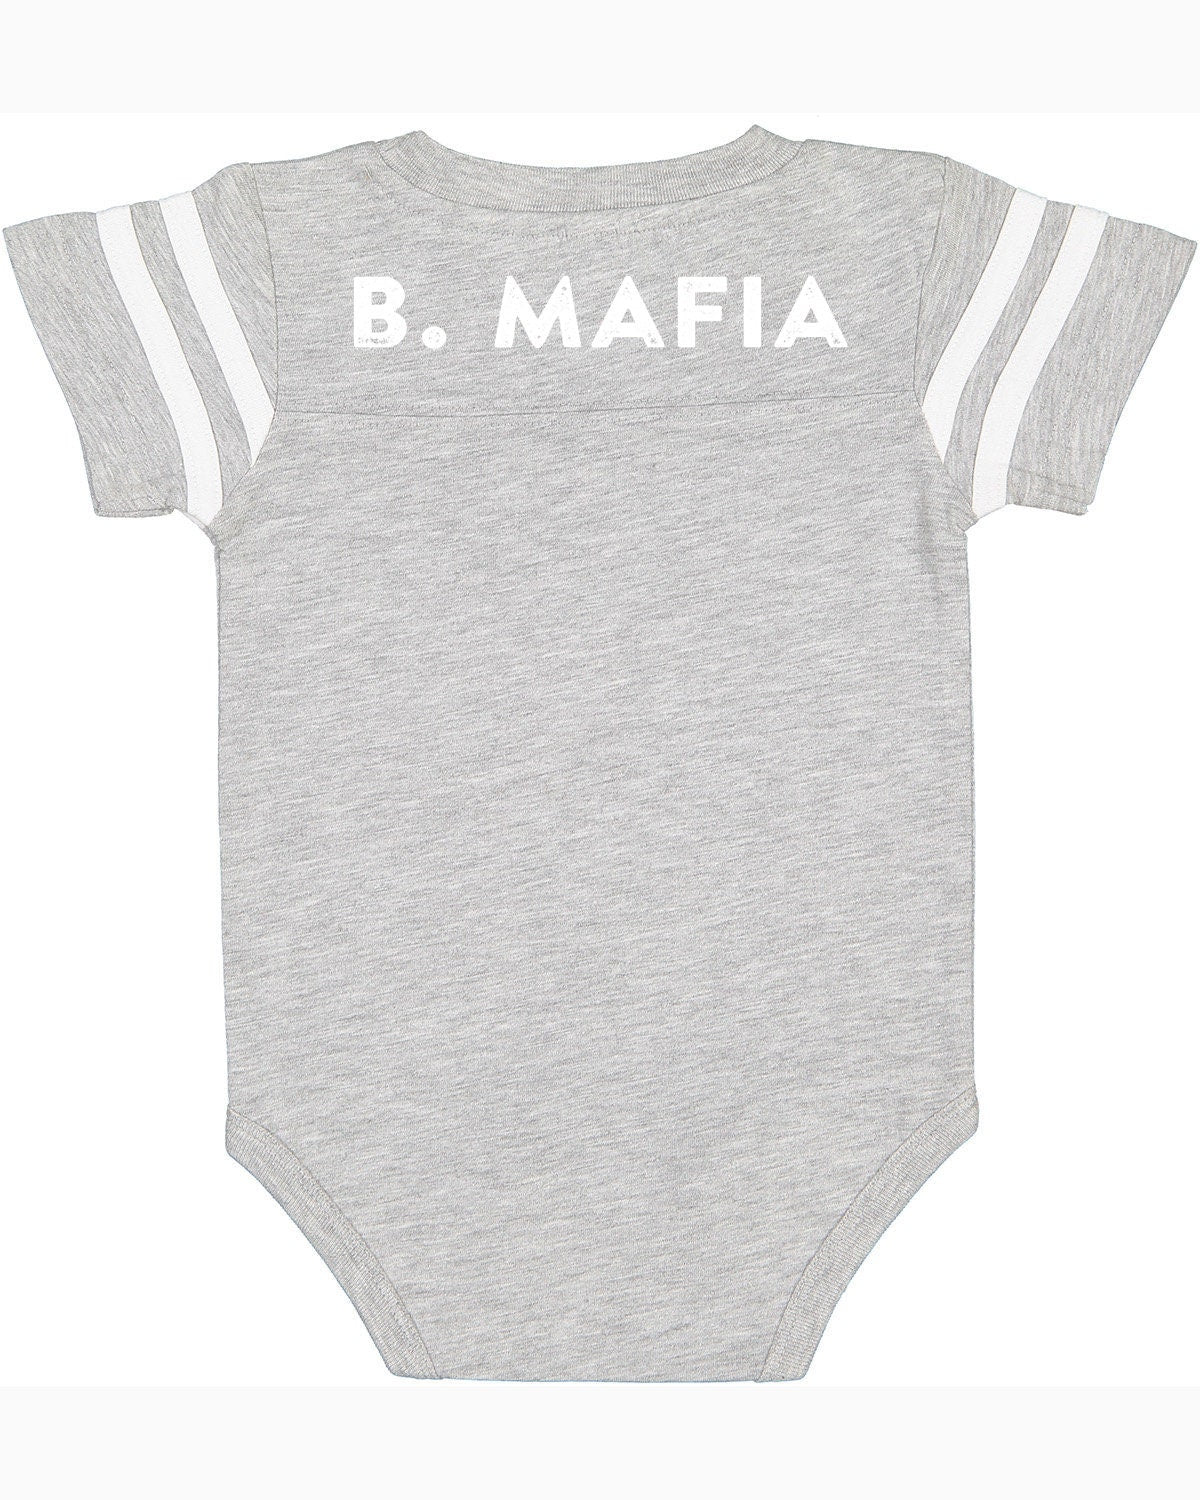 Adorable Buffalo Kids Intimate for Sale - Size XS(4-5)